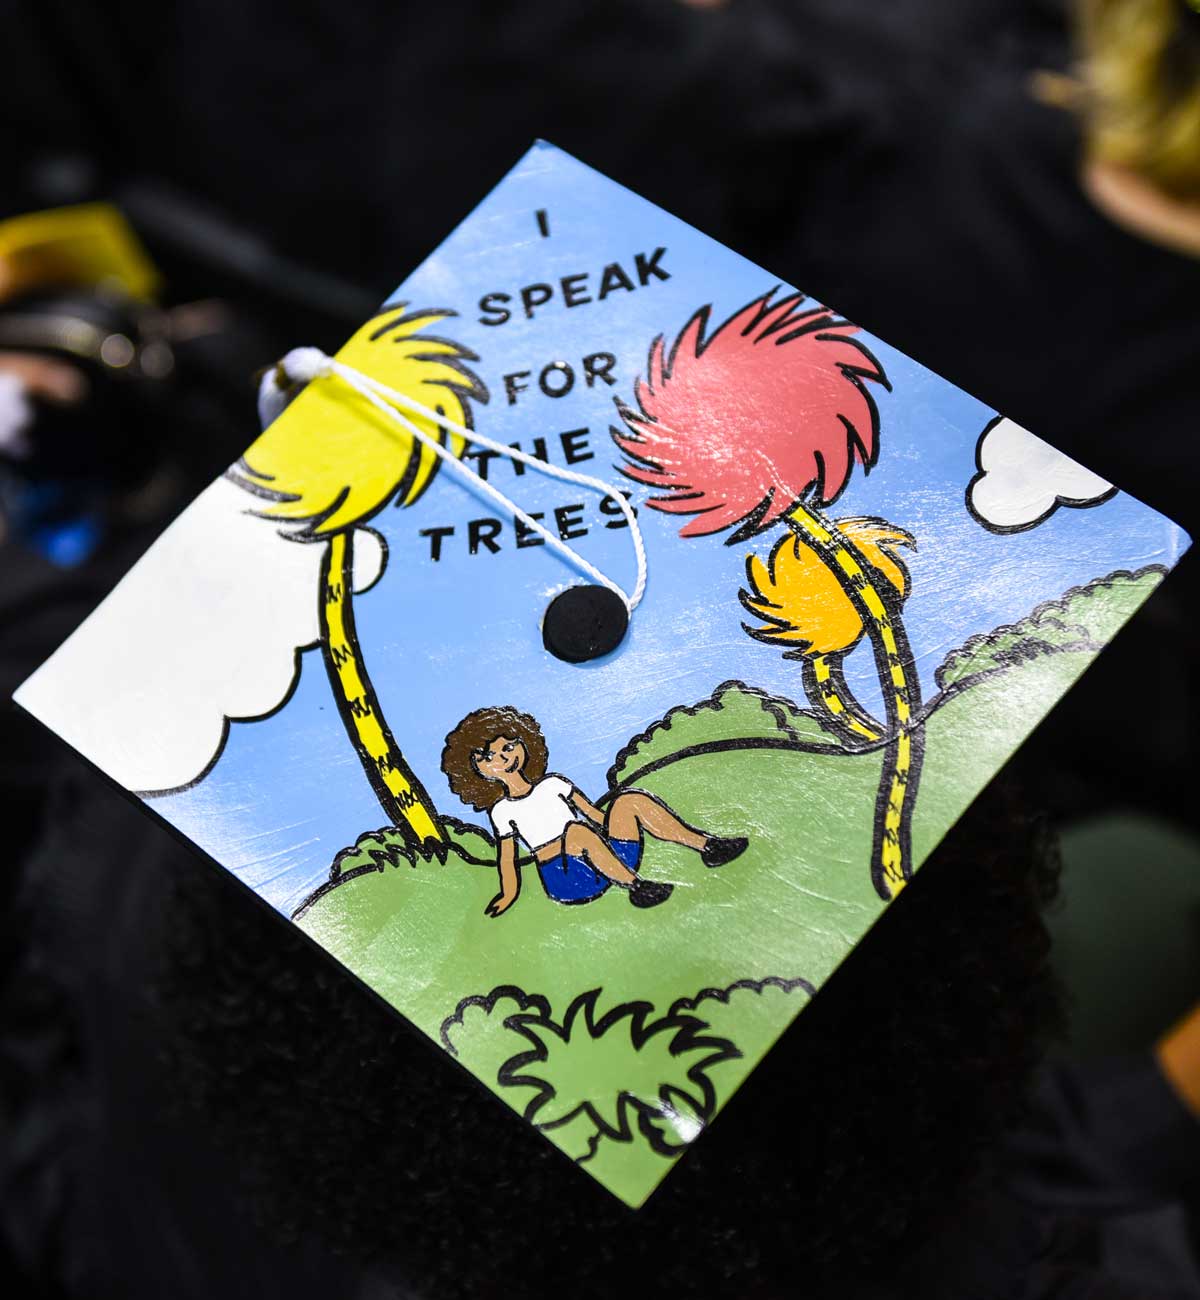 Grad cap decorated with text: I speak for the trees